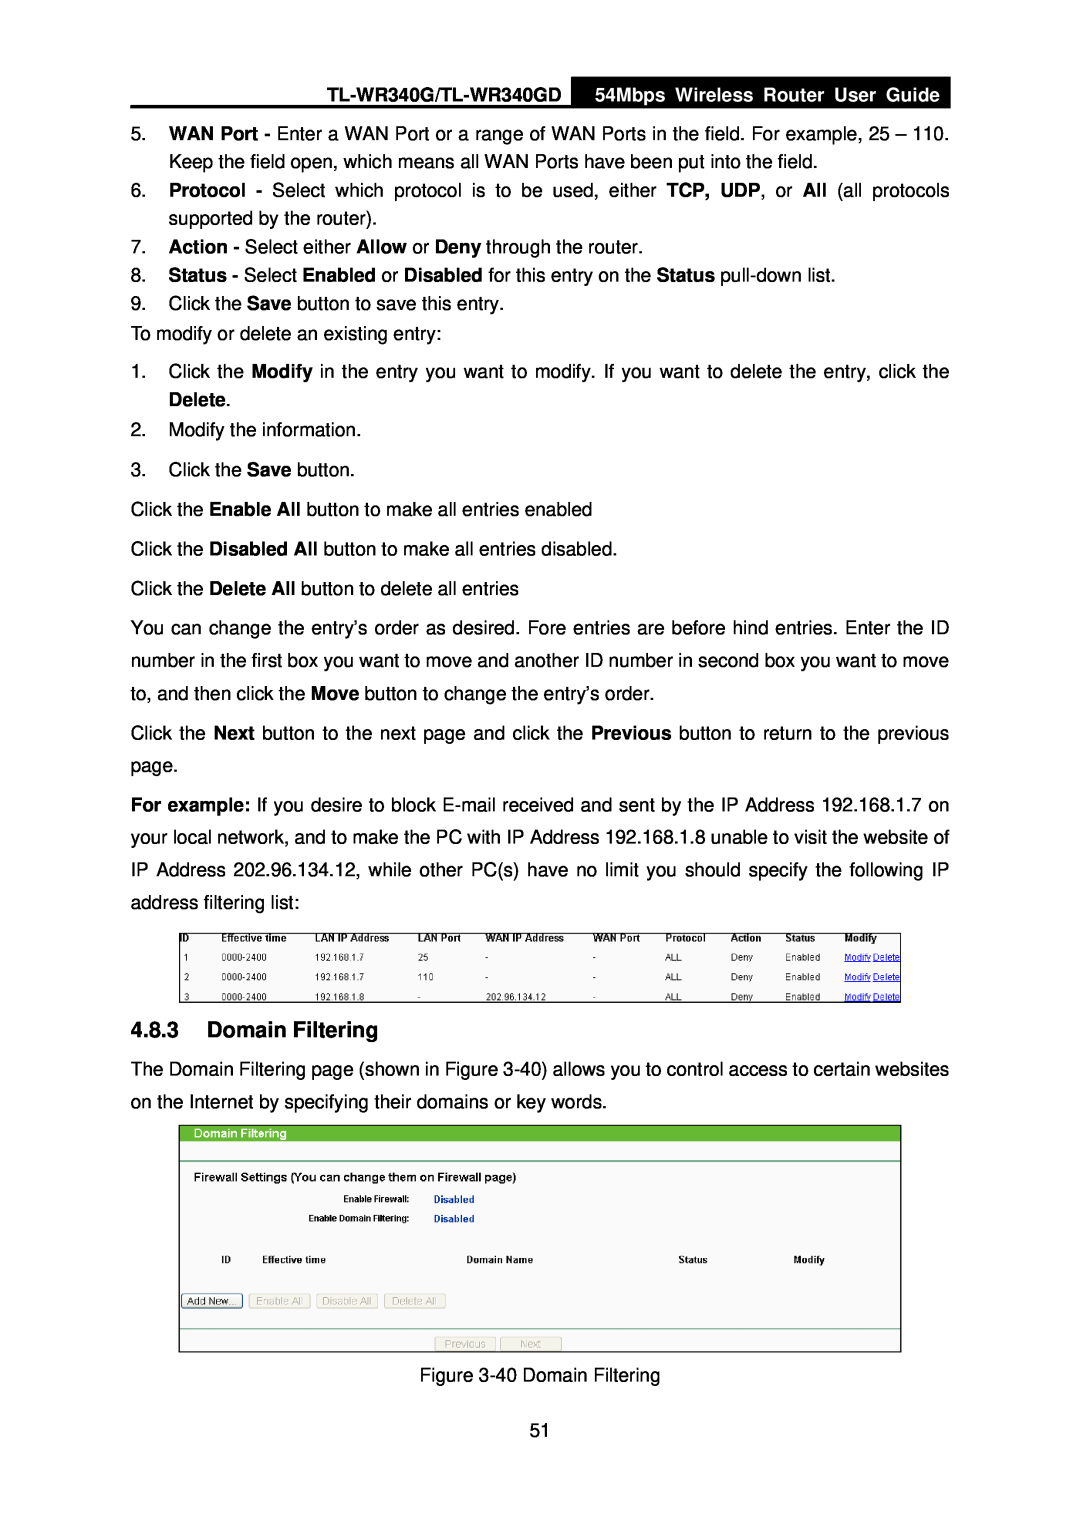 TP-Link manual Domain Filtering, TL-WR340G/TL-WR340GD, 54Mbps Wireless Router User Guide 